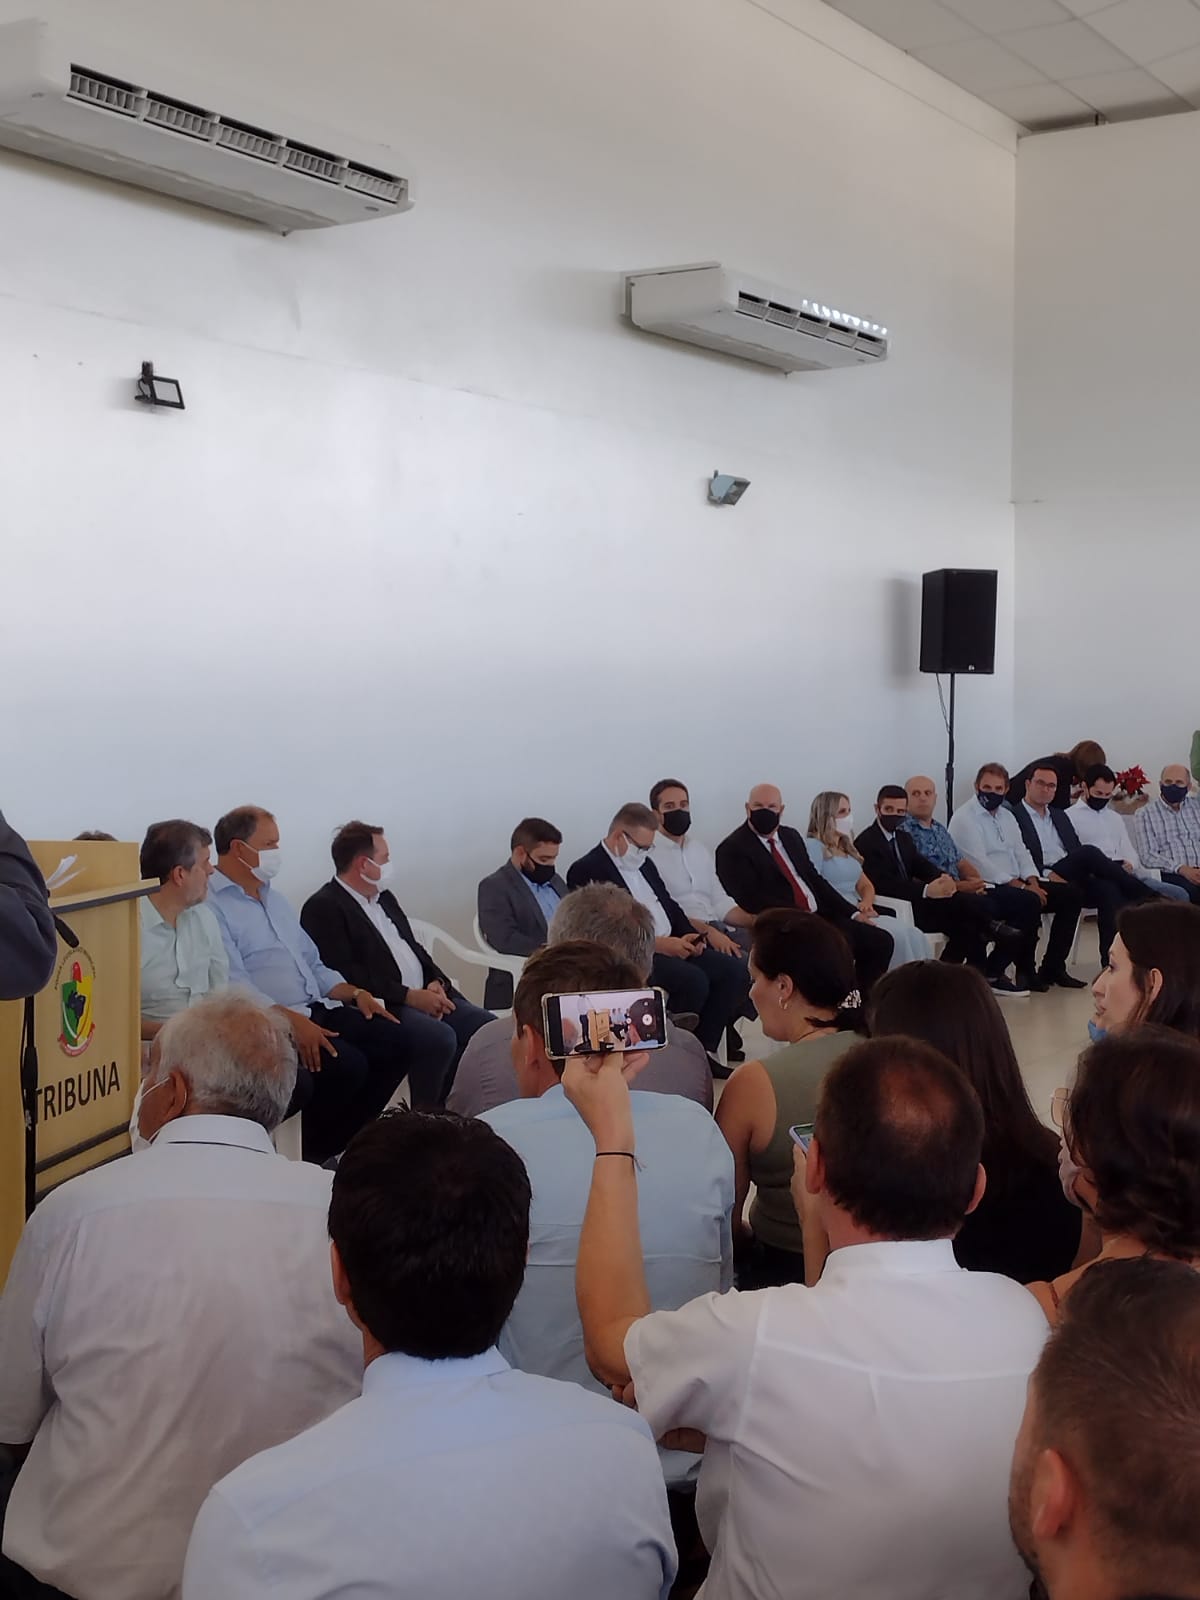 After the ceremony at HBB, the governor went to Roca Sales, where he signed contracts for the paving of the Pão e Vinho Route (Photo: Disclosure).